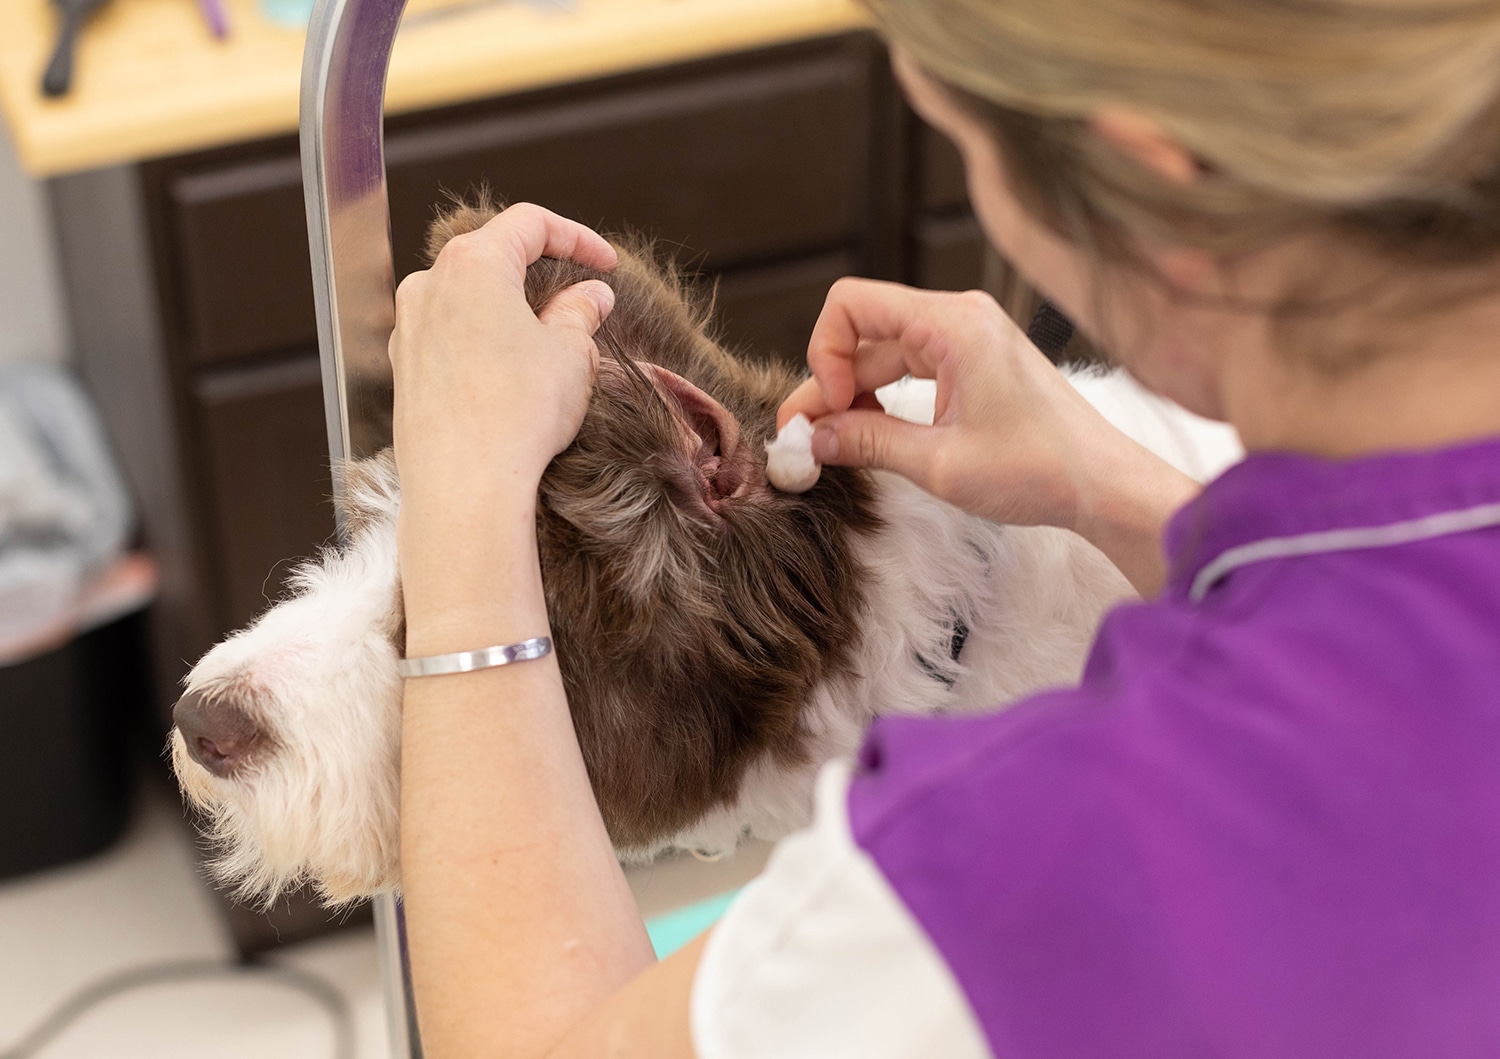 Dog ear infection symptoms, cleaning dog ears, smoochie pooch dog groomers, pet groomers near me